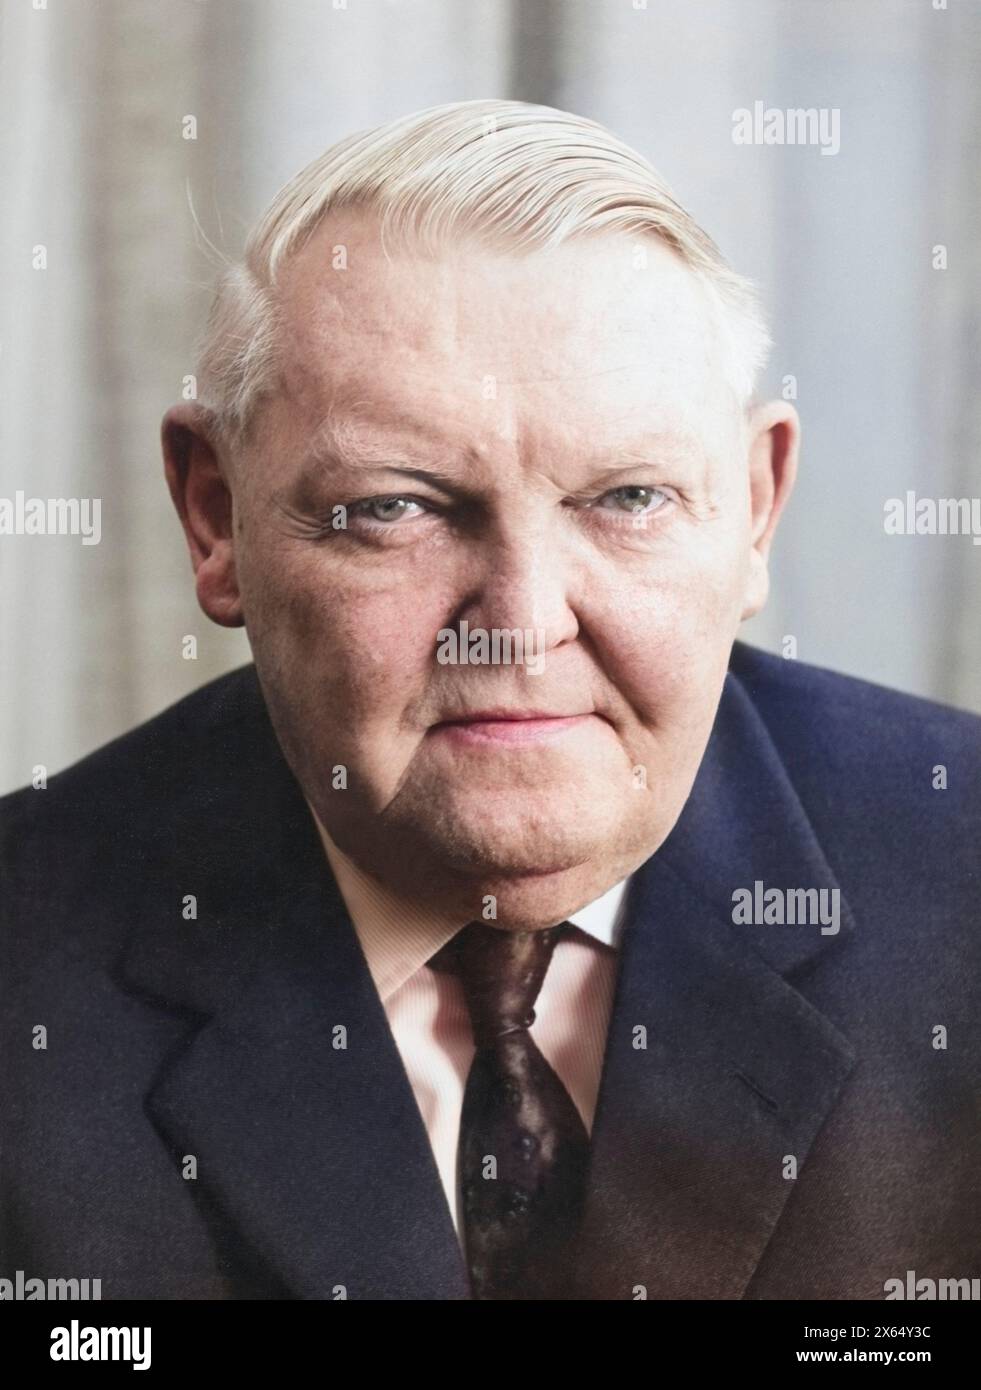 Erhard, Ludwig, 4.2.1897 - 5,5.1977, deutscher Politiker (CDU), ADDITIONAL-RIGHTS-CLEARANCE-INFO-NOT-AVAILABLE Stockfoto